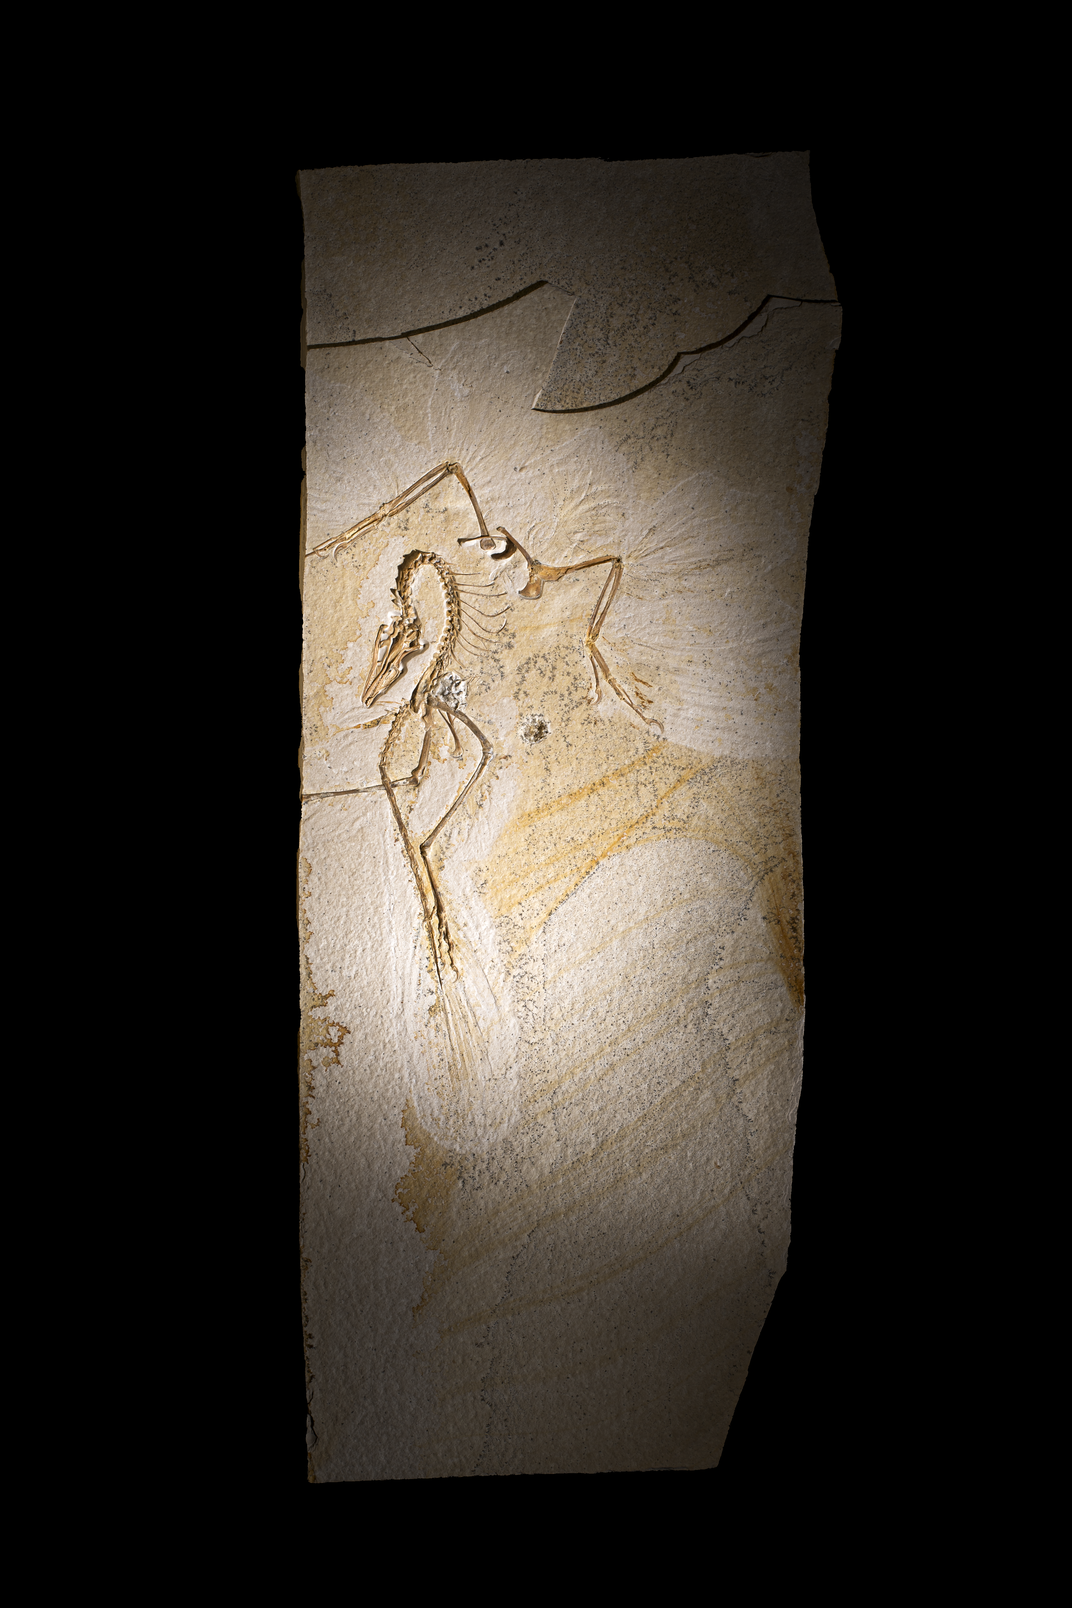 an archaeopteryx fossil spotlighted on a dark background